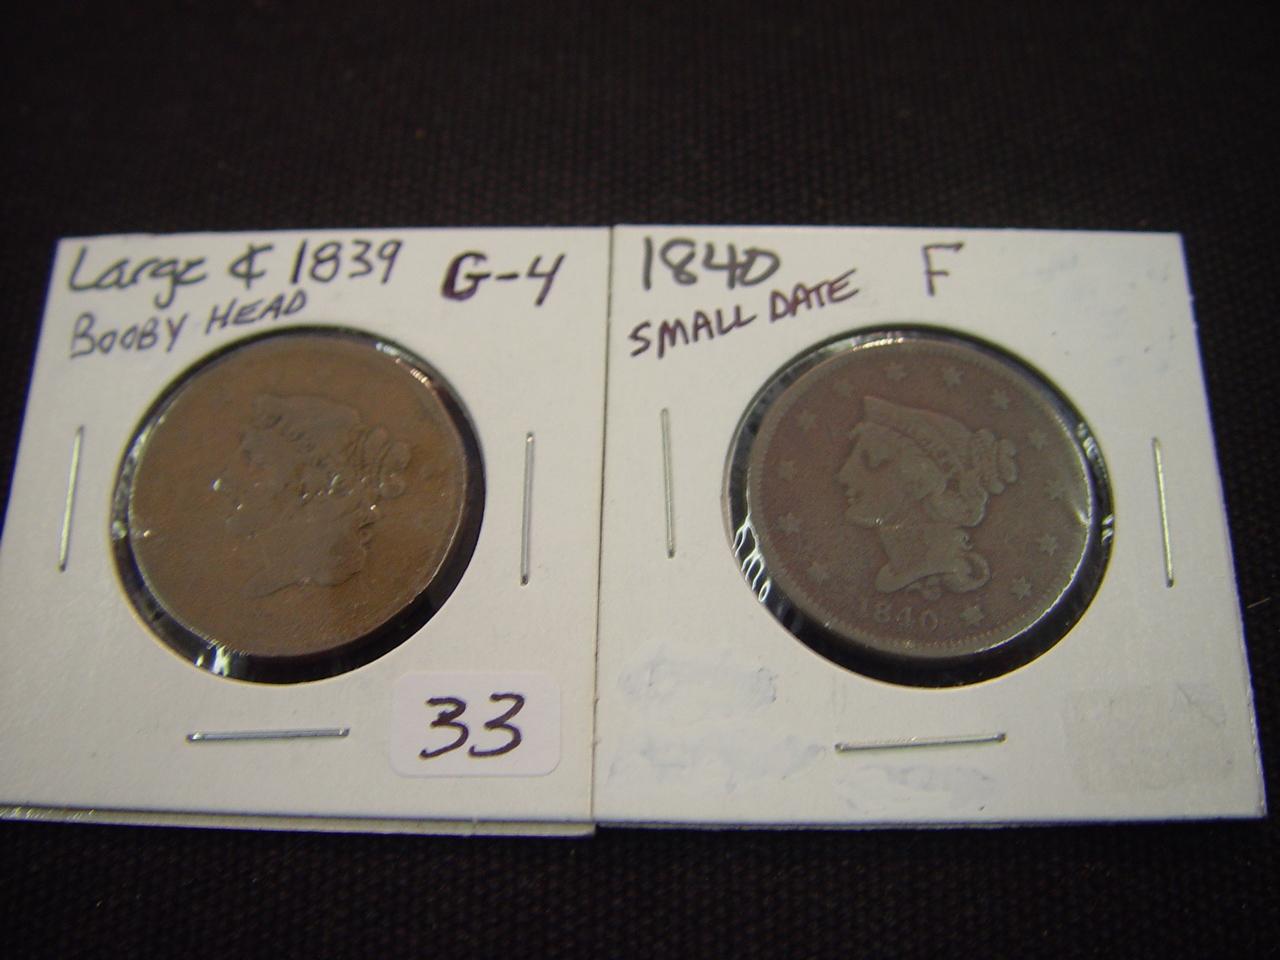 Two Large Cents 1839 Booby Head G & 1840 Small Date F